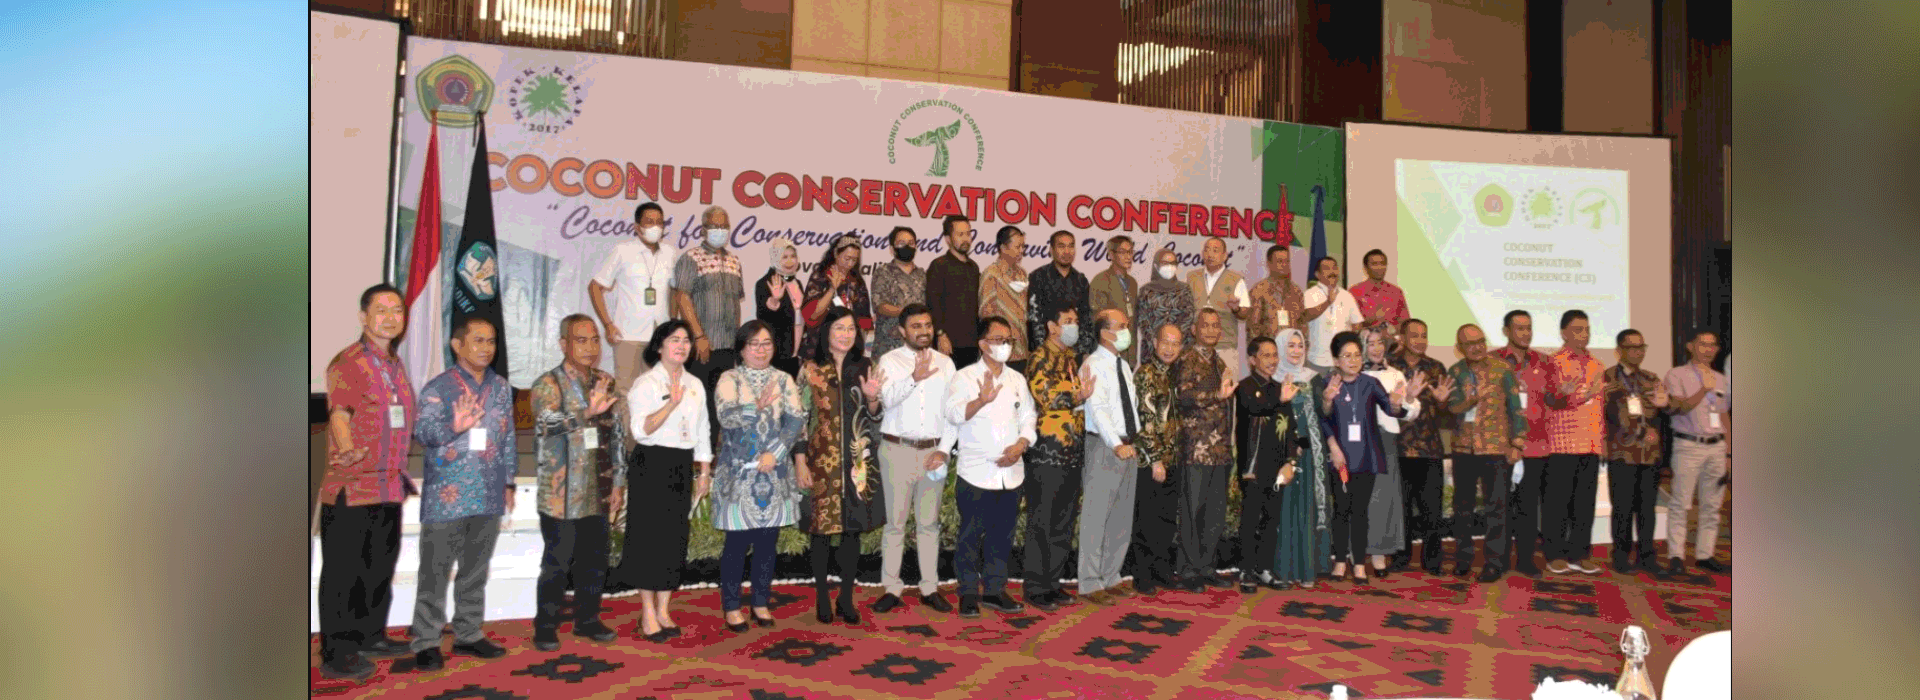 icc-attended-the-coconut-conservation-conference-and-declaration-of-coconut-as-the-indonesian-origin-plant20220706095115.png